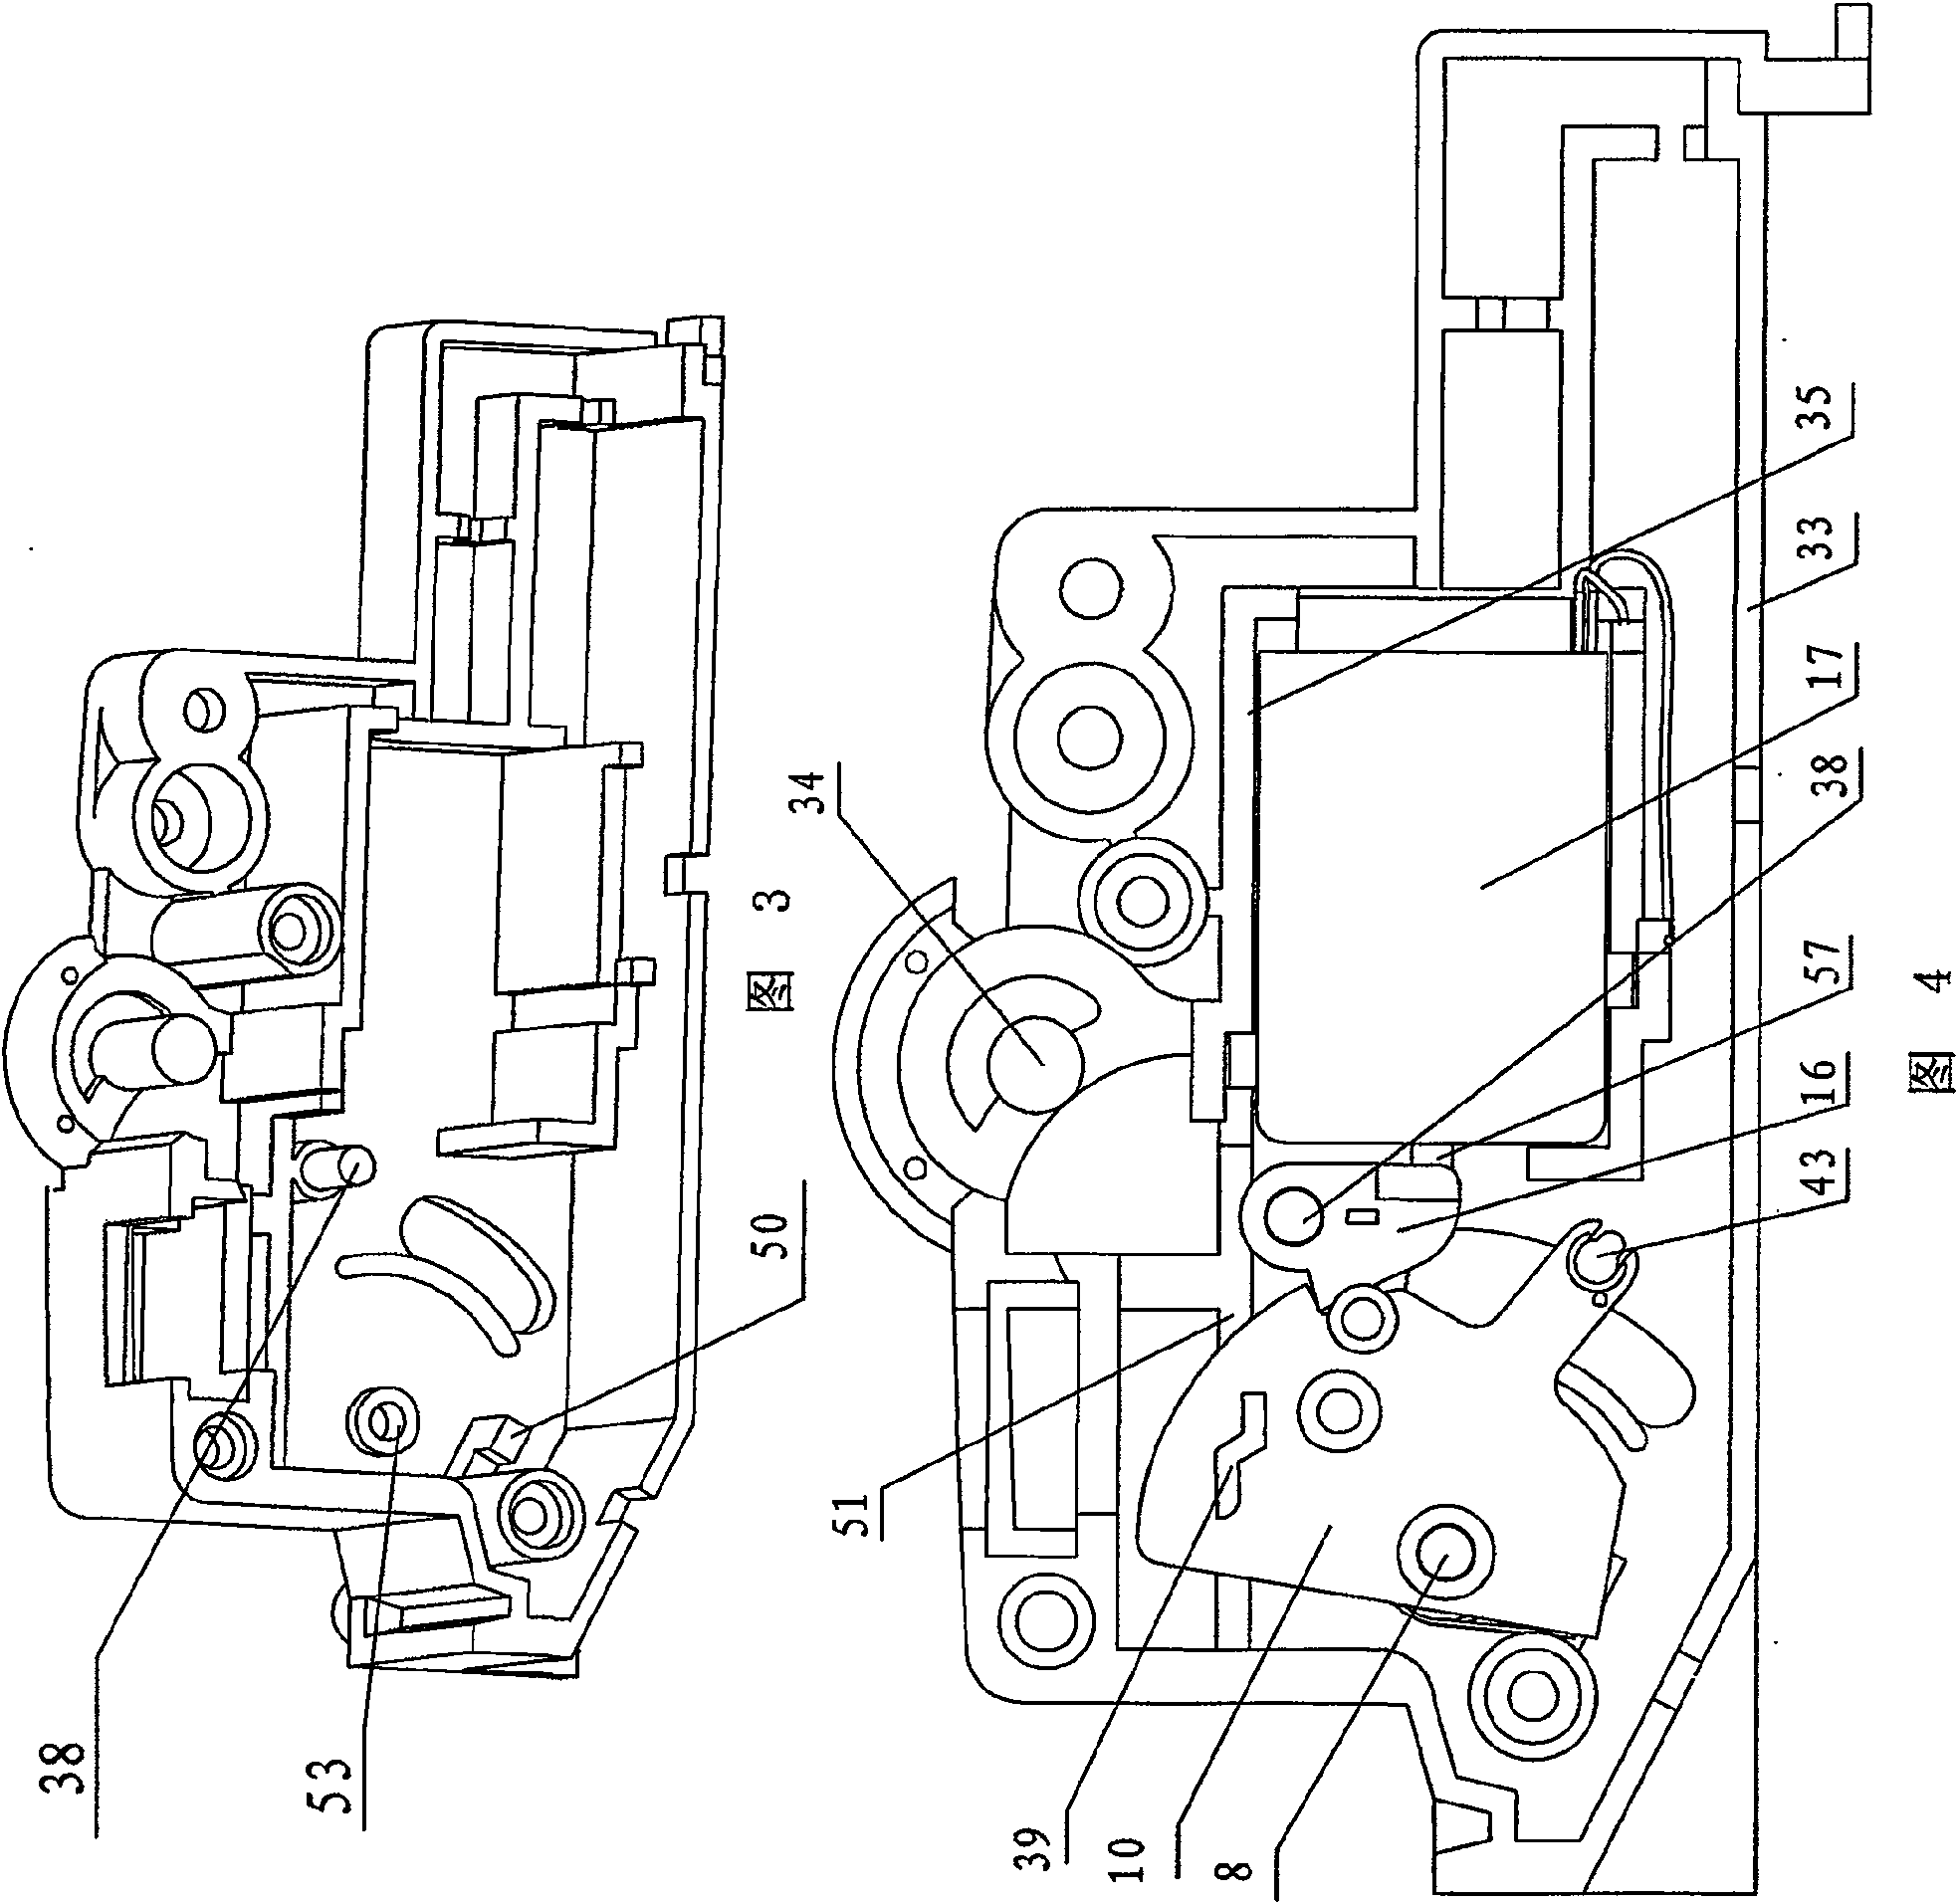 Electromagnetical type residual current movement protectors mechanism